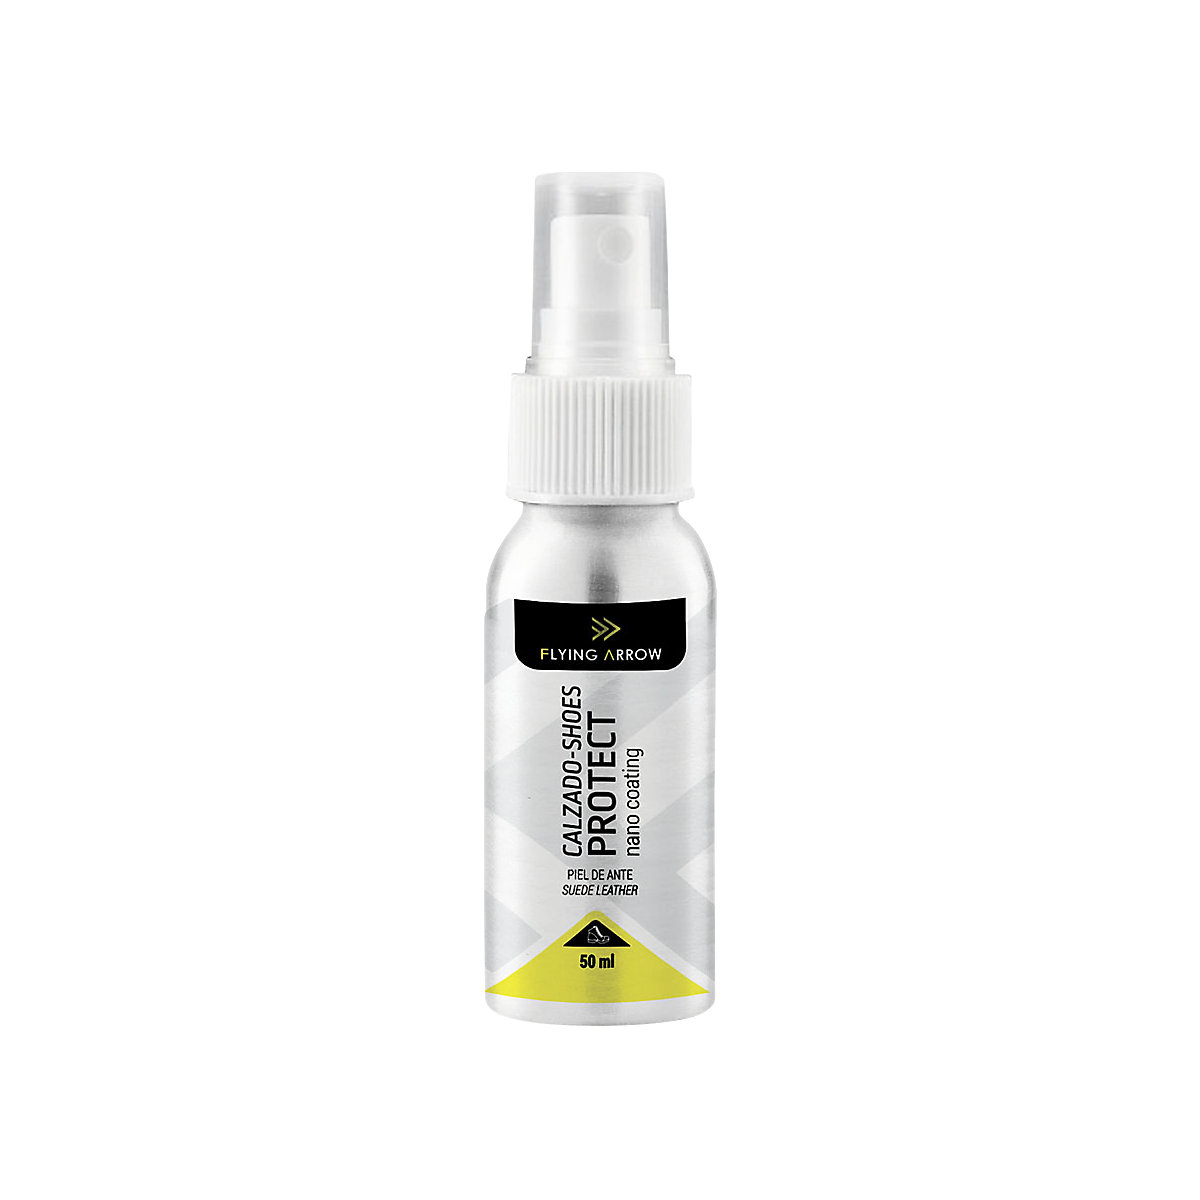 FLYING ARROW PROTECTOR shoe protection spray - DUNLOP